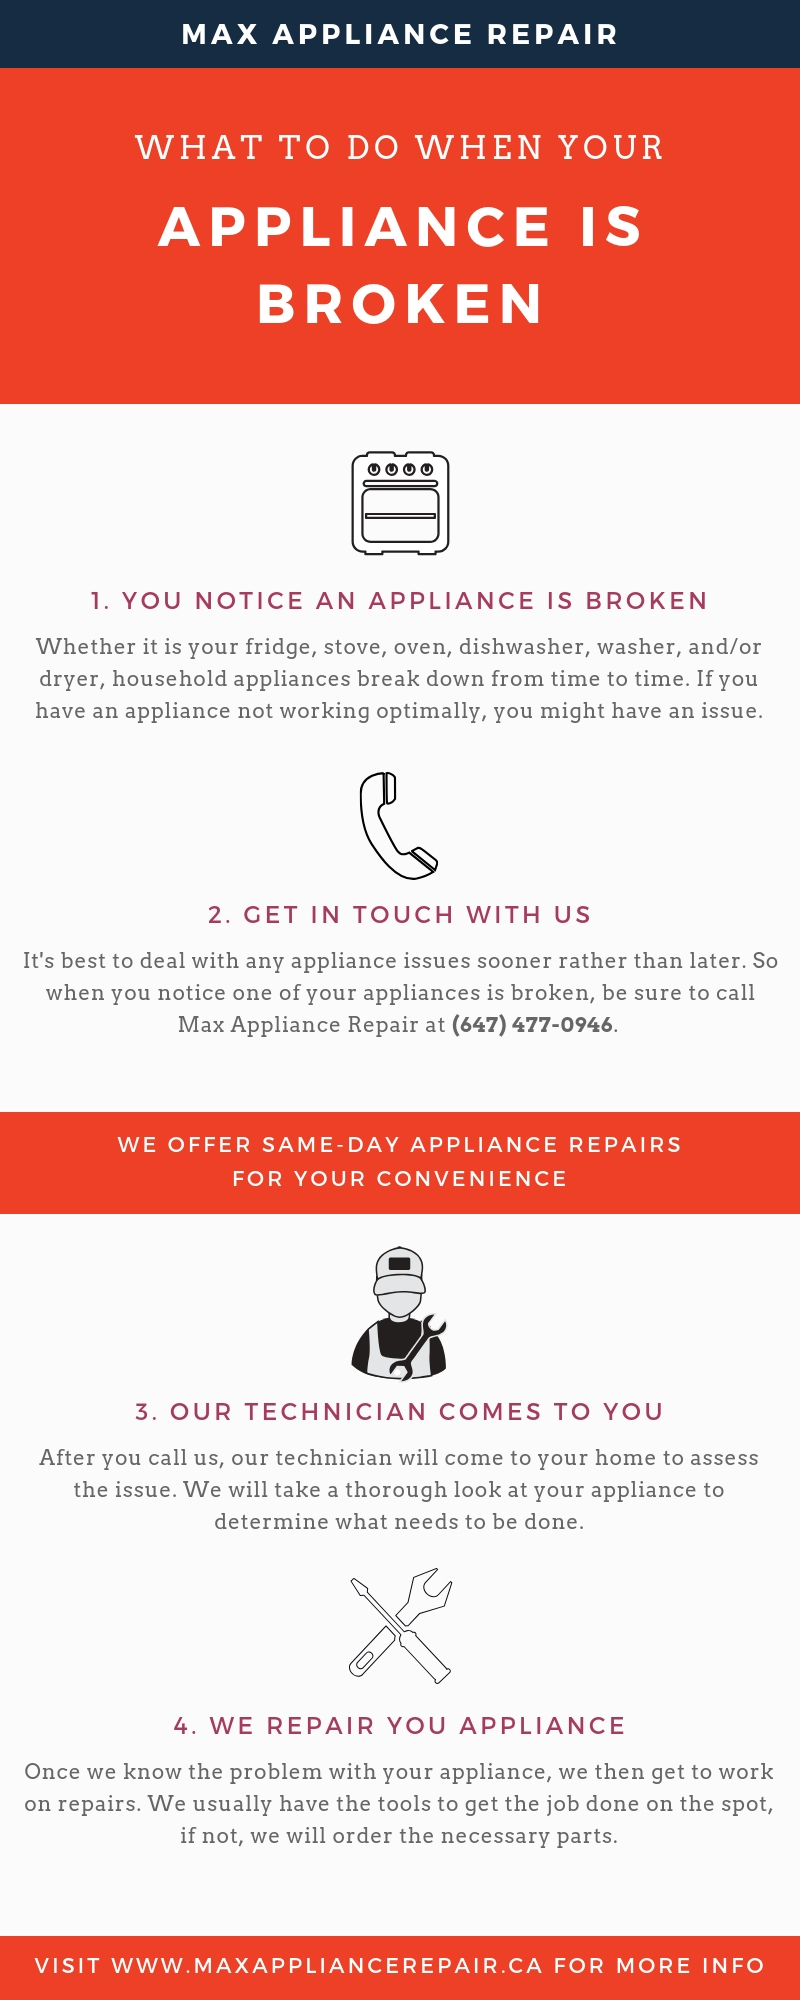 Max Appliance Repair - Infographic